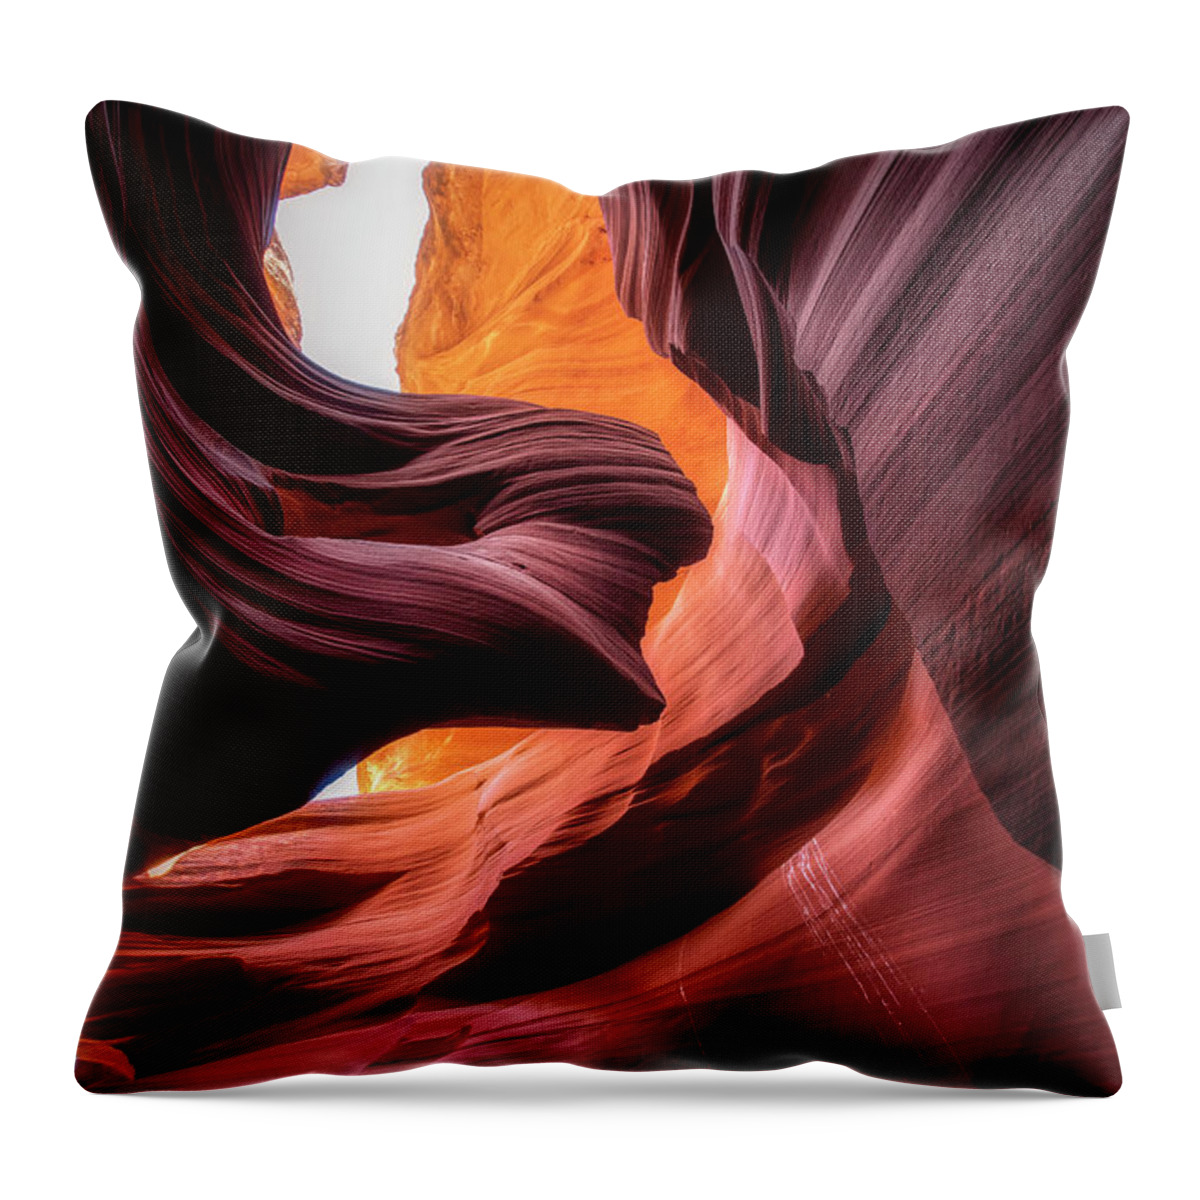 Arizona Throw Pillow featuring the photograph Lady In The Wind 2020 by Robert Fawcett